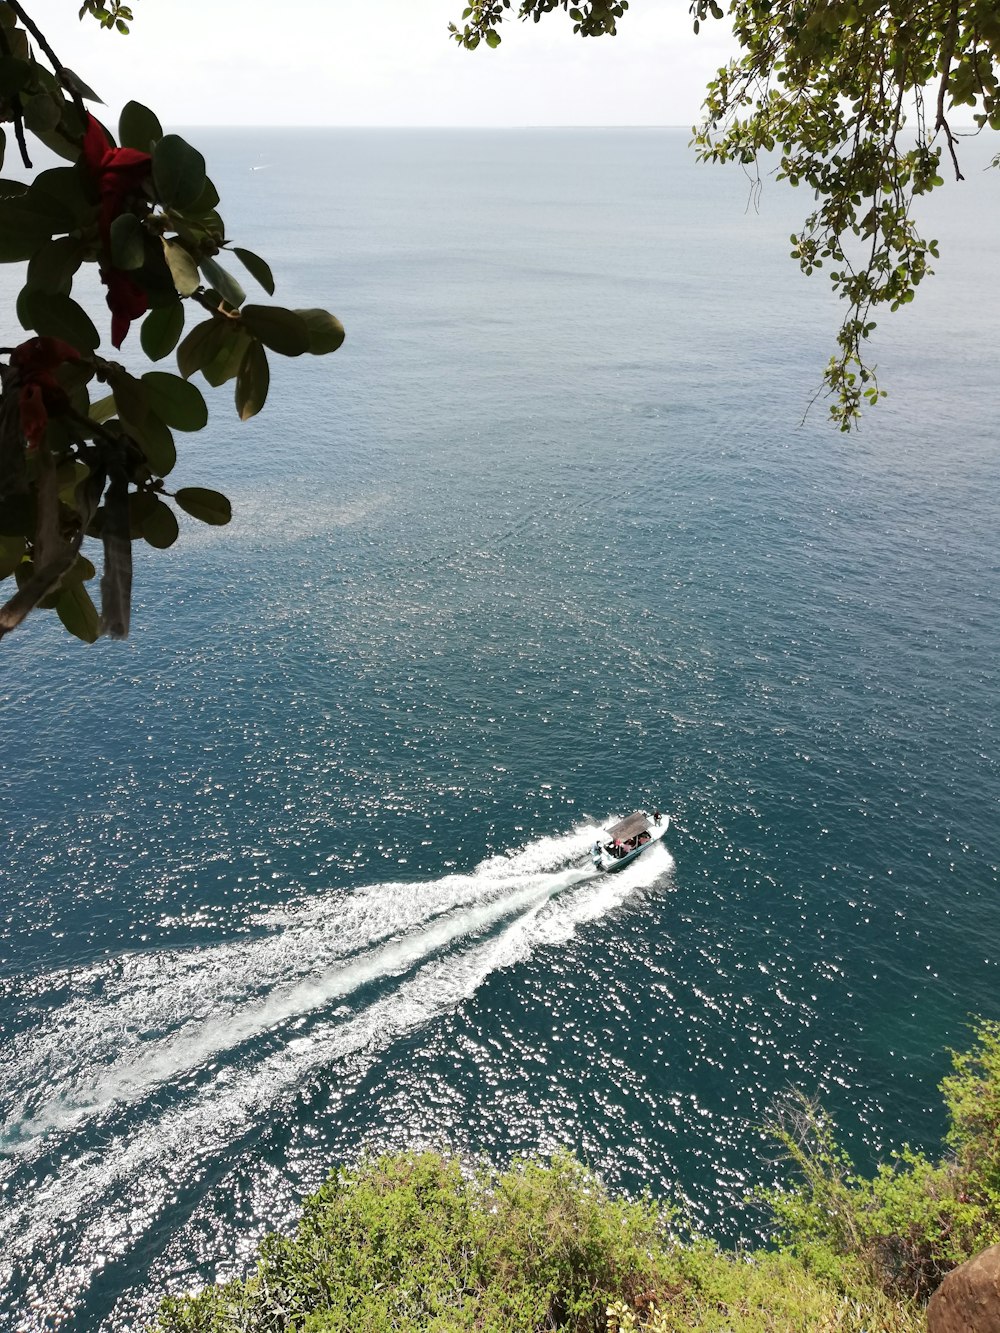 a boat traveling on the water near a cliff